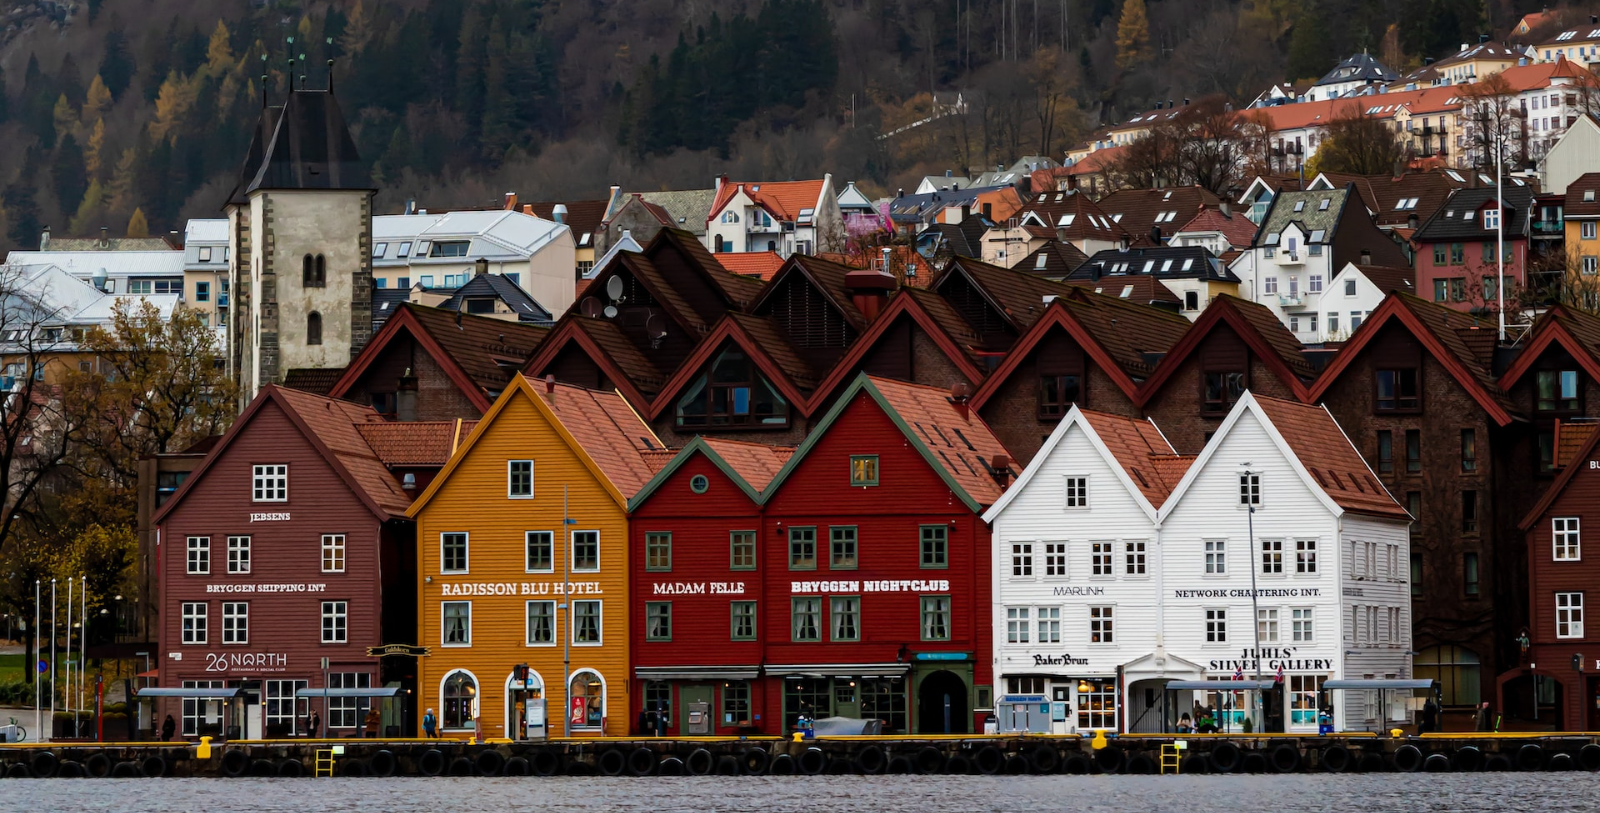 Explore the narrow alleyways and enjoy the harbor views of historic Bryggen, a centuries-old wharf and UNESCO World Heritage Site renowned for its Hanseatic trading heritage and colorful wooden houses straight out of a fairy tale.